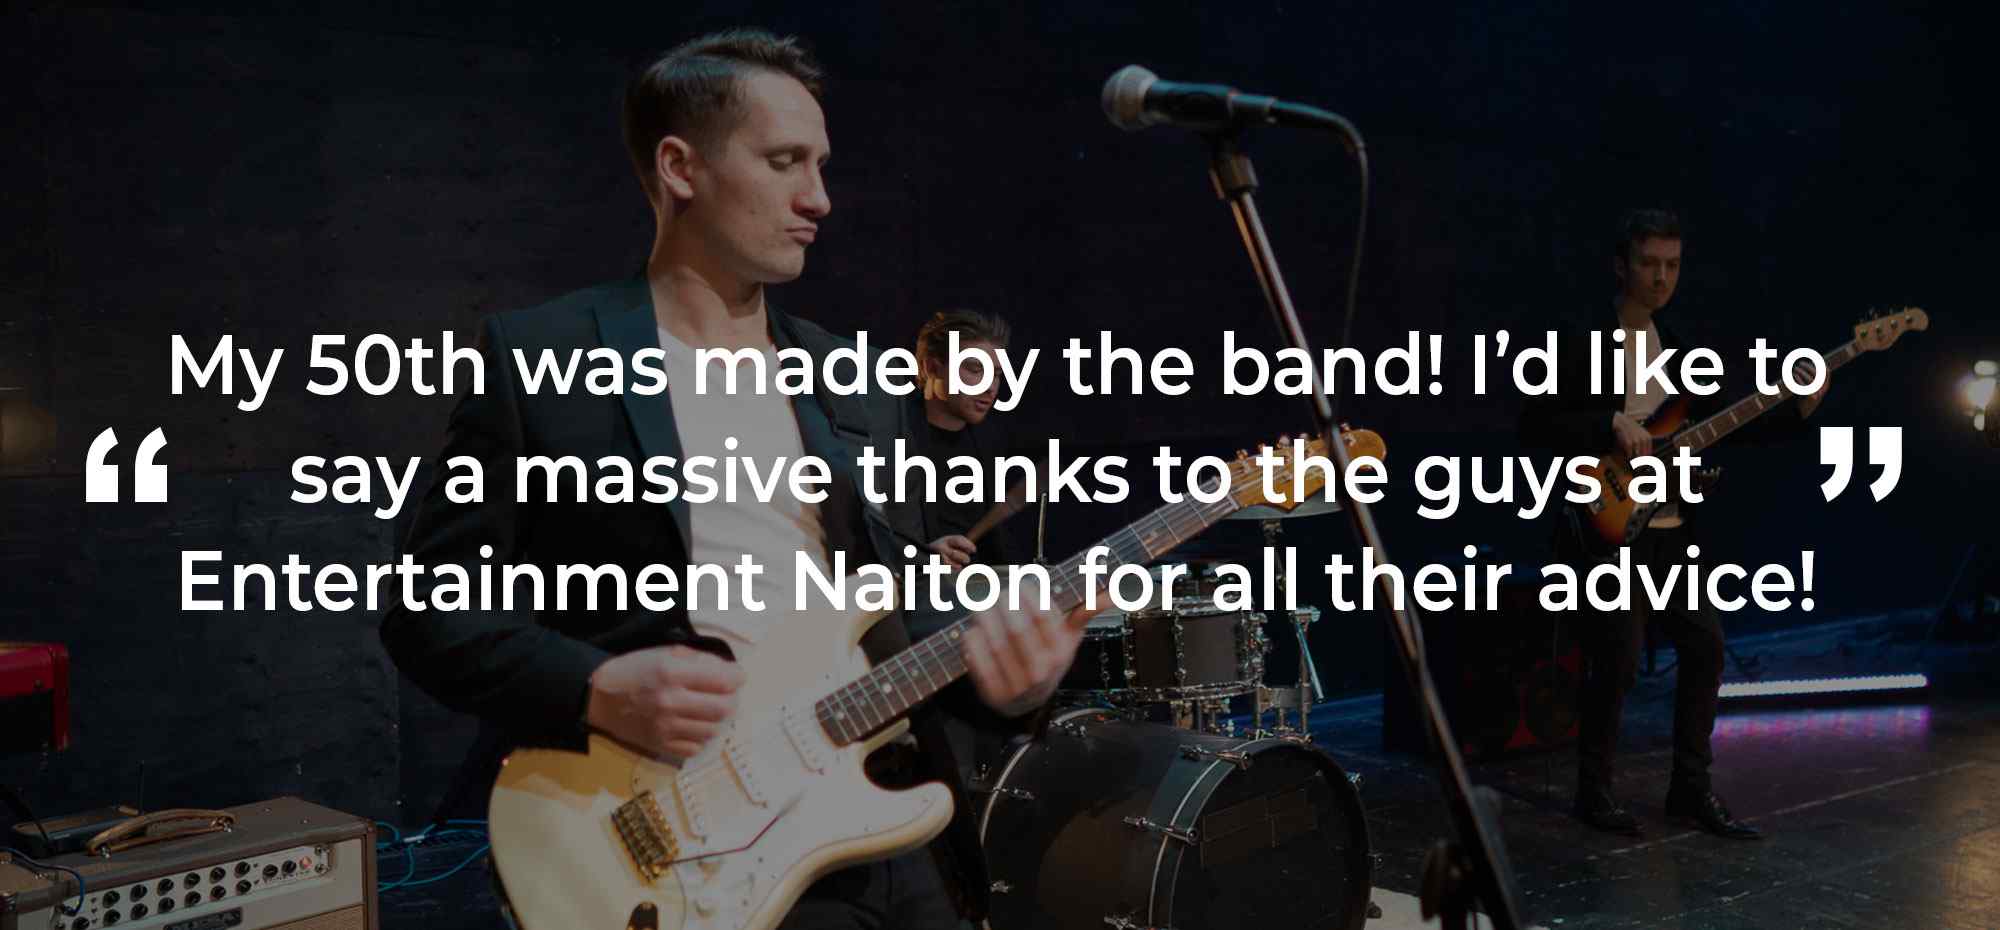 Client Review of a Party Band Norfolk